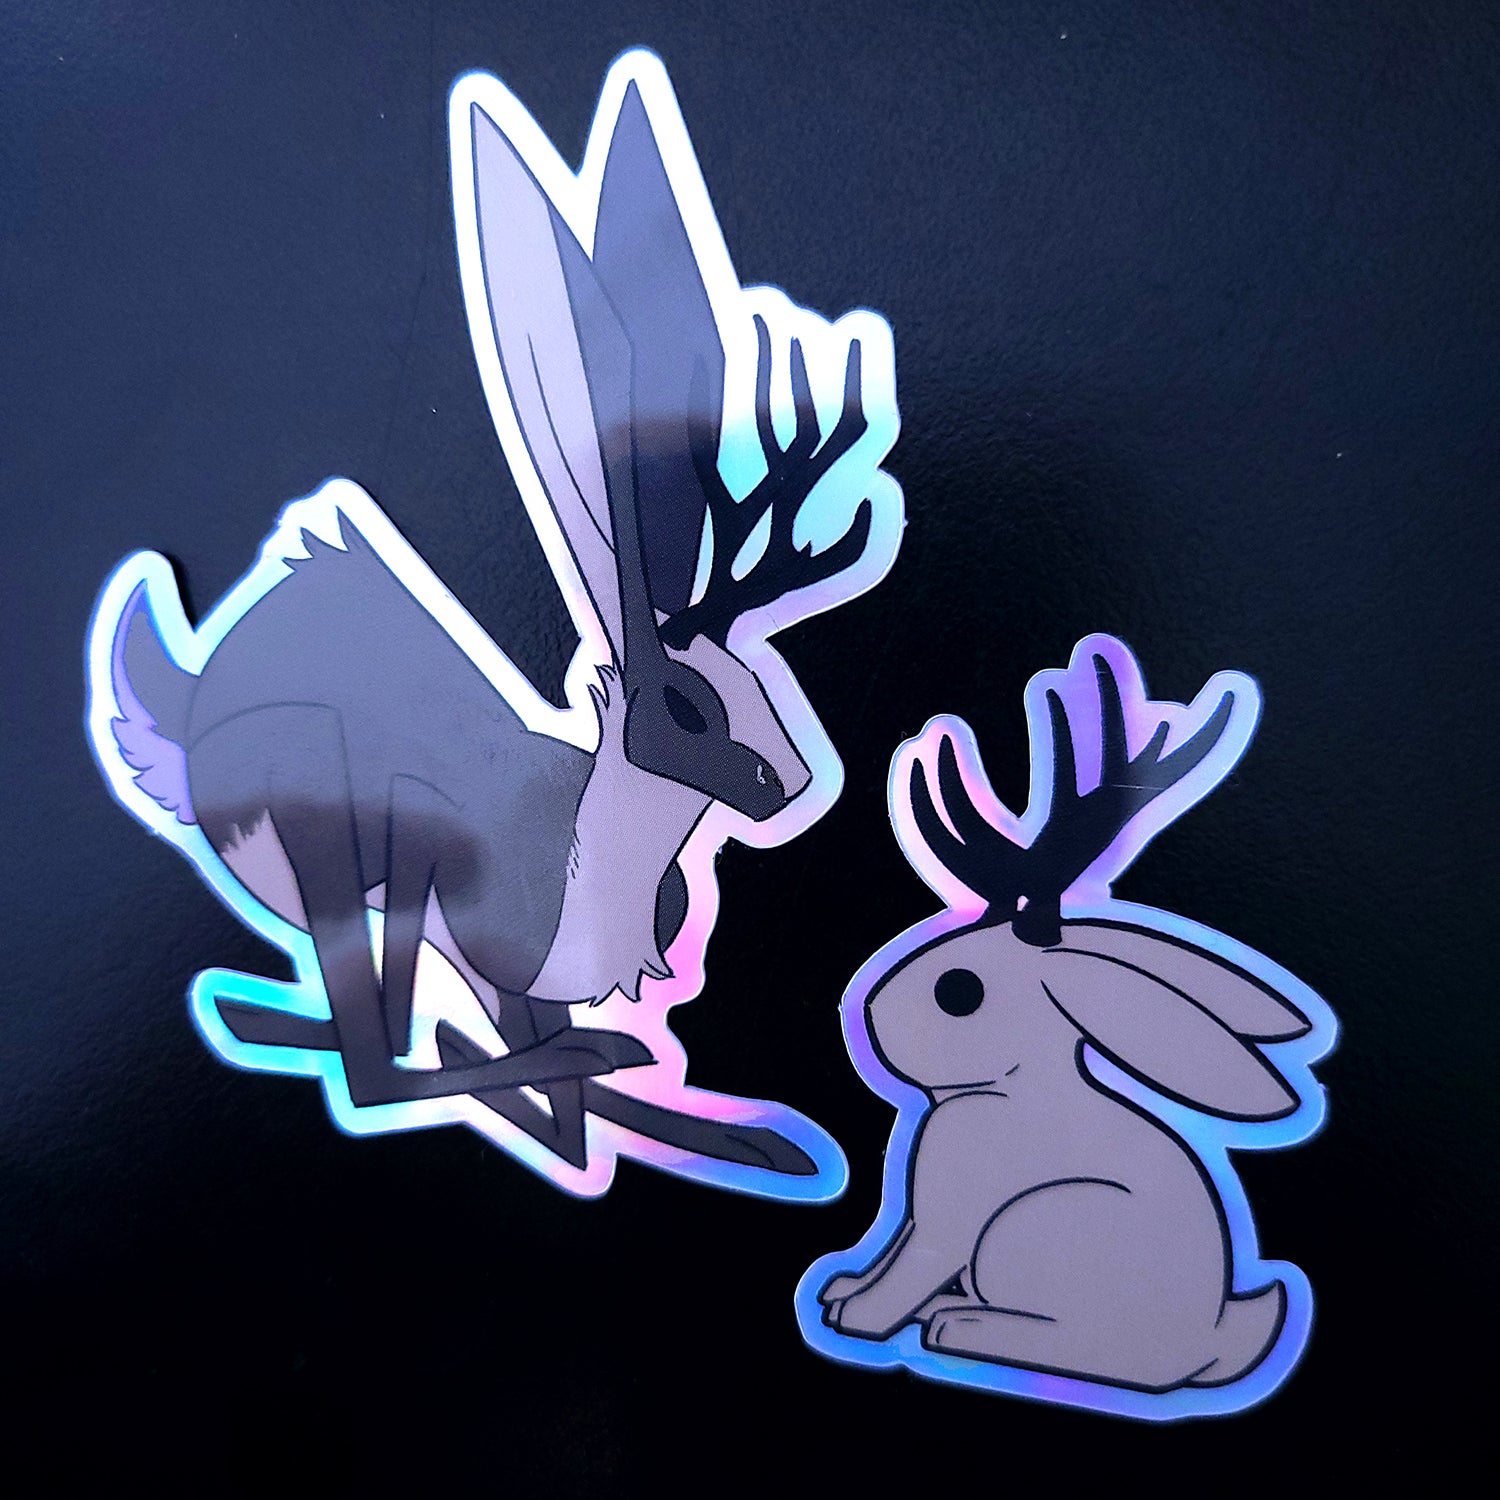 Show Me Your Fupa Sticker for Sale by The Jackalope